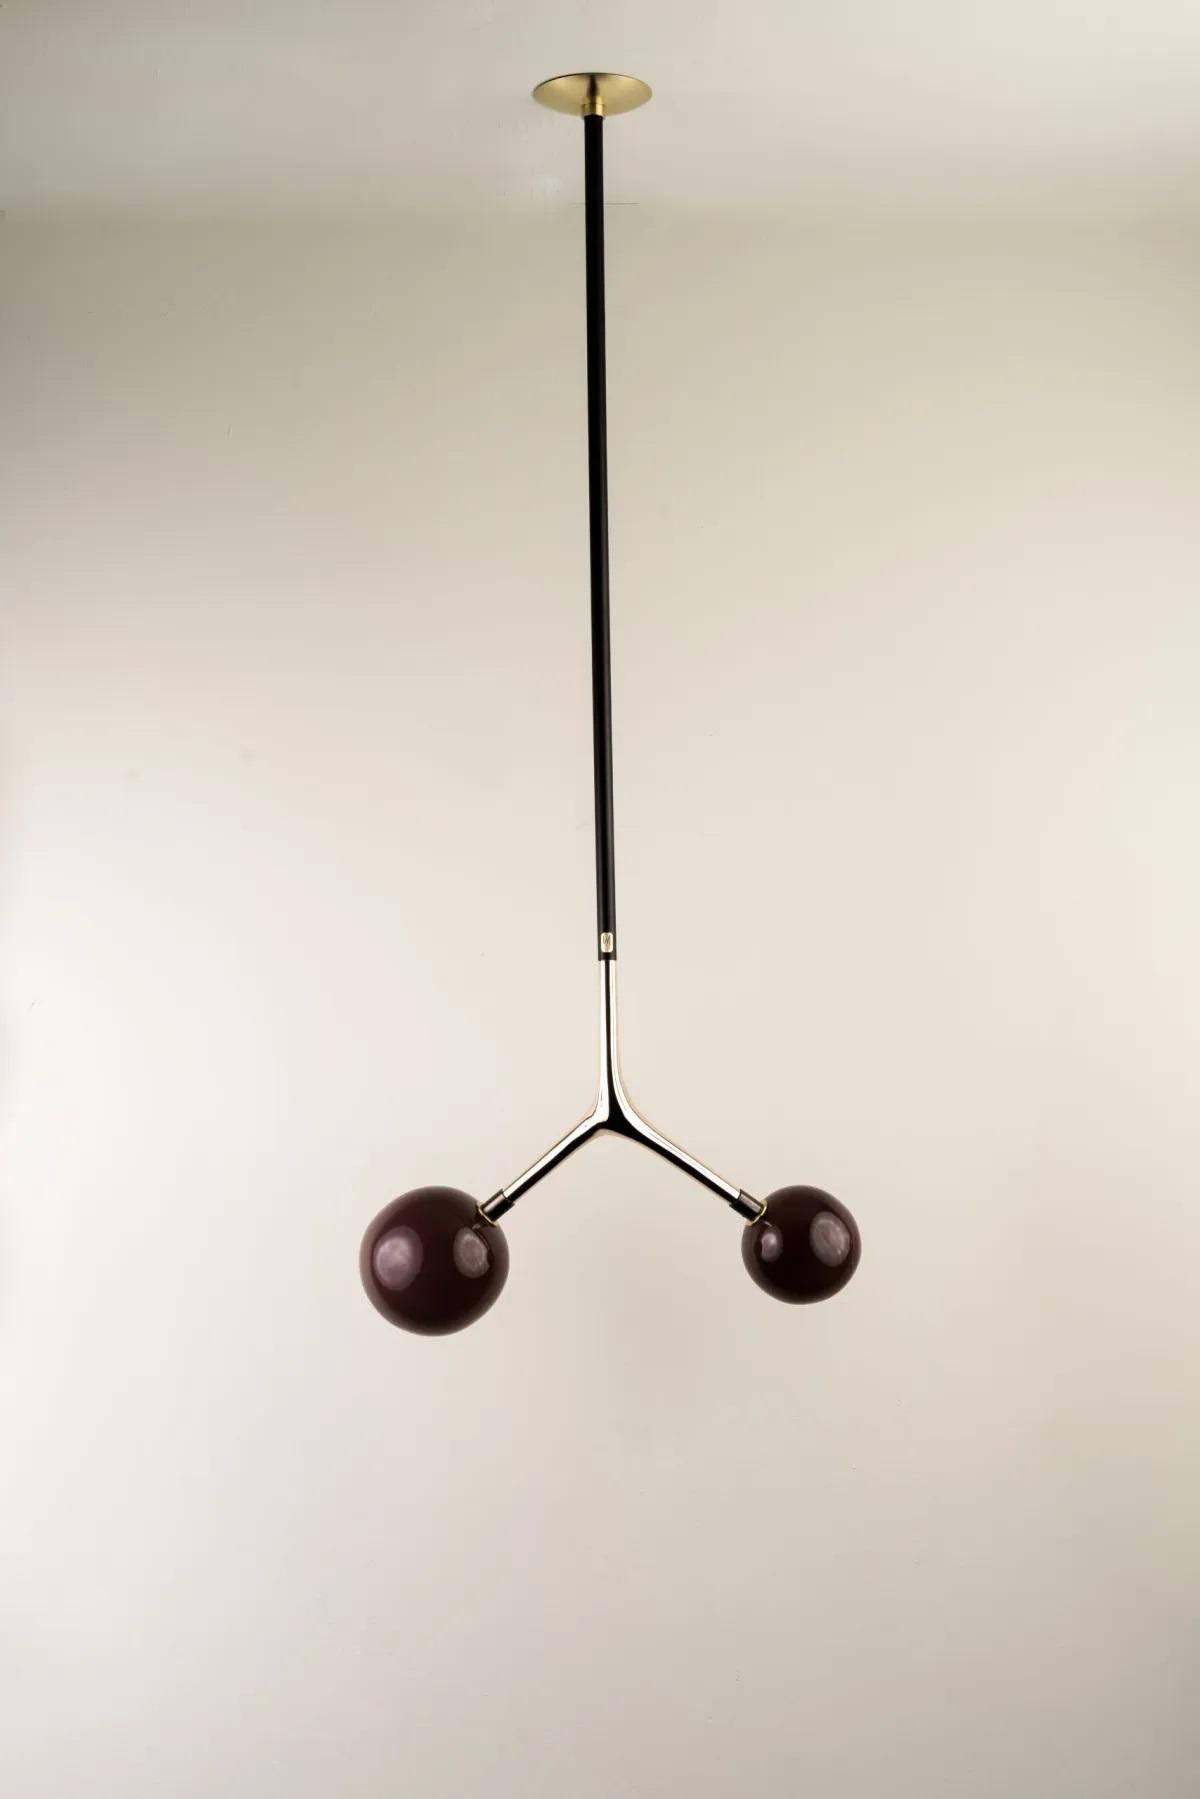 Aubergine Dupla Pendant Lamp by Isabel Moncada
Dimensions: W 45 x D 20 x H 125 cm.
Materials: Brass, cast bronze and blown glass.

Dupla hangs from the ceiling just like a branch with its fruits. The customizable length options allow play with scale